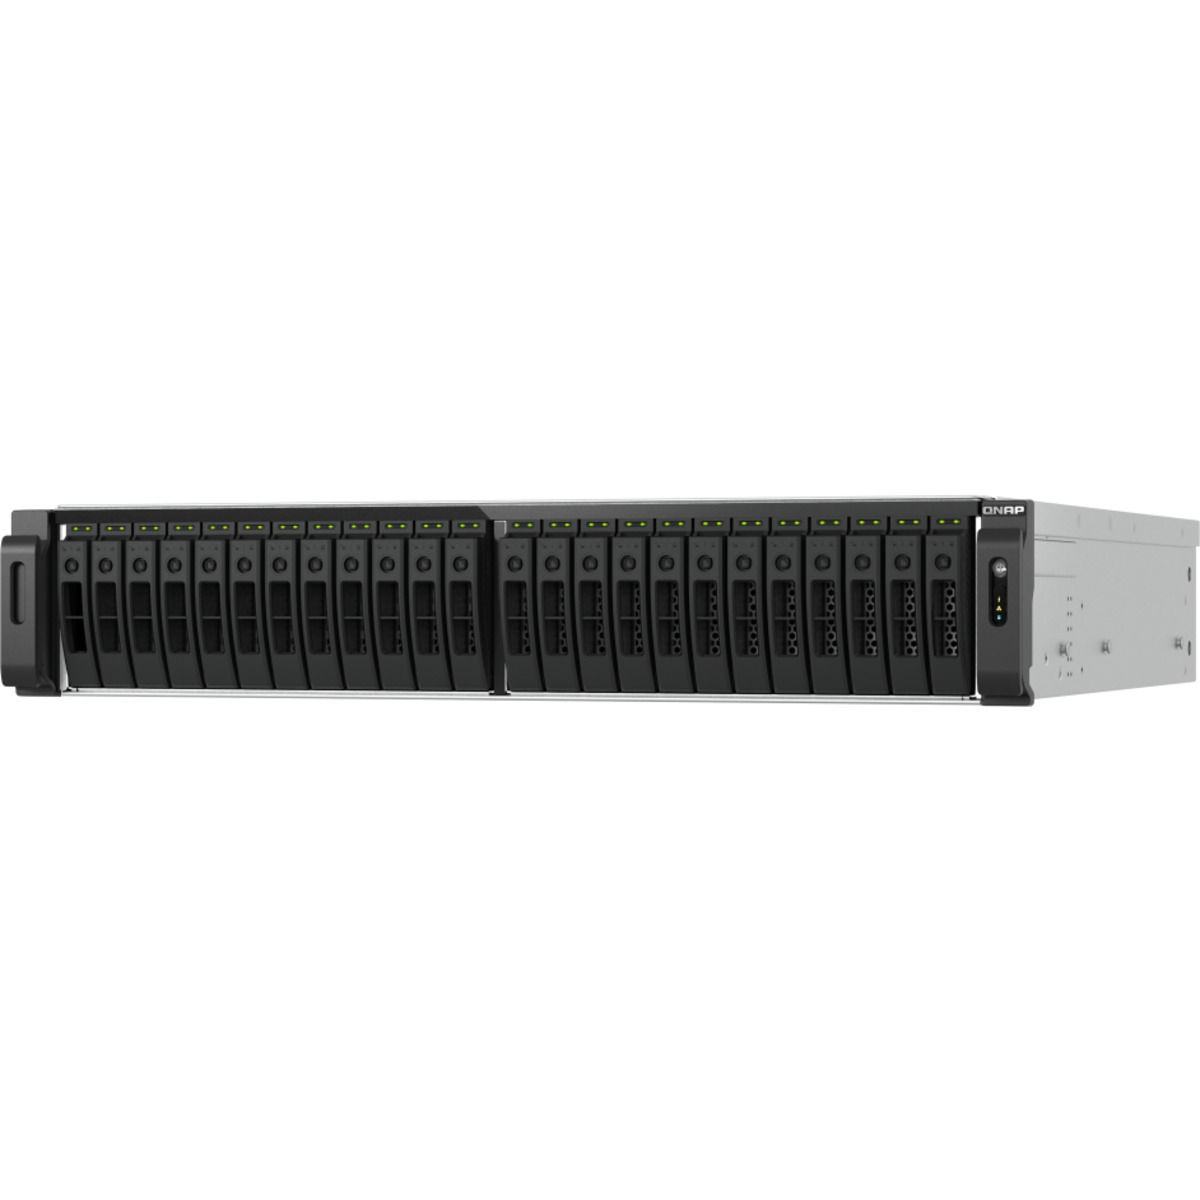 buy QNAP TS-h3077AFU Ryzen 7 All-Flash ZFS 120tb RackMount NAS - Network Attached Storage Device 30x4000gb Samsung 870 EVO MZ-77E4T0BAM 2.5 560/530MB/s SATA 6Gb/s SSD CONSUMER Class Drives Installed - Burn-In Tested - nas headquarters buy network attached storage server device das new raid-5 free shipping usa spring sale TS-h3077AFU Ryzen 7 All-Flash ZFS